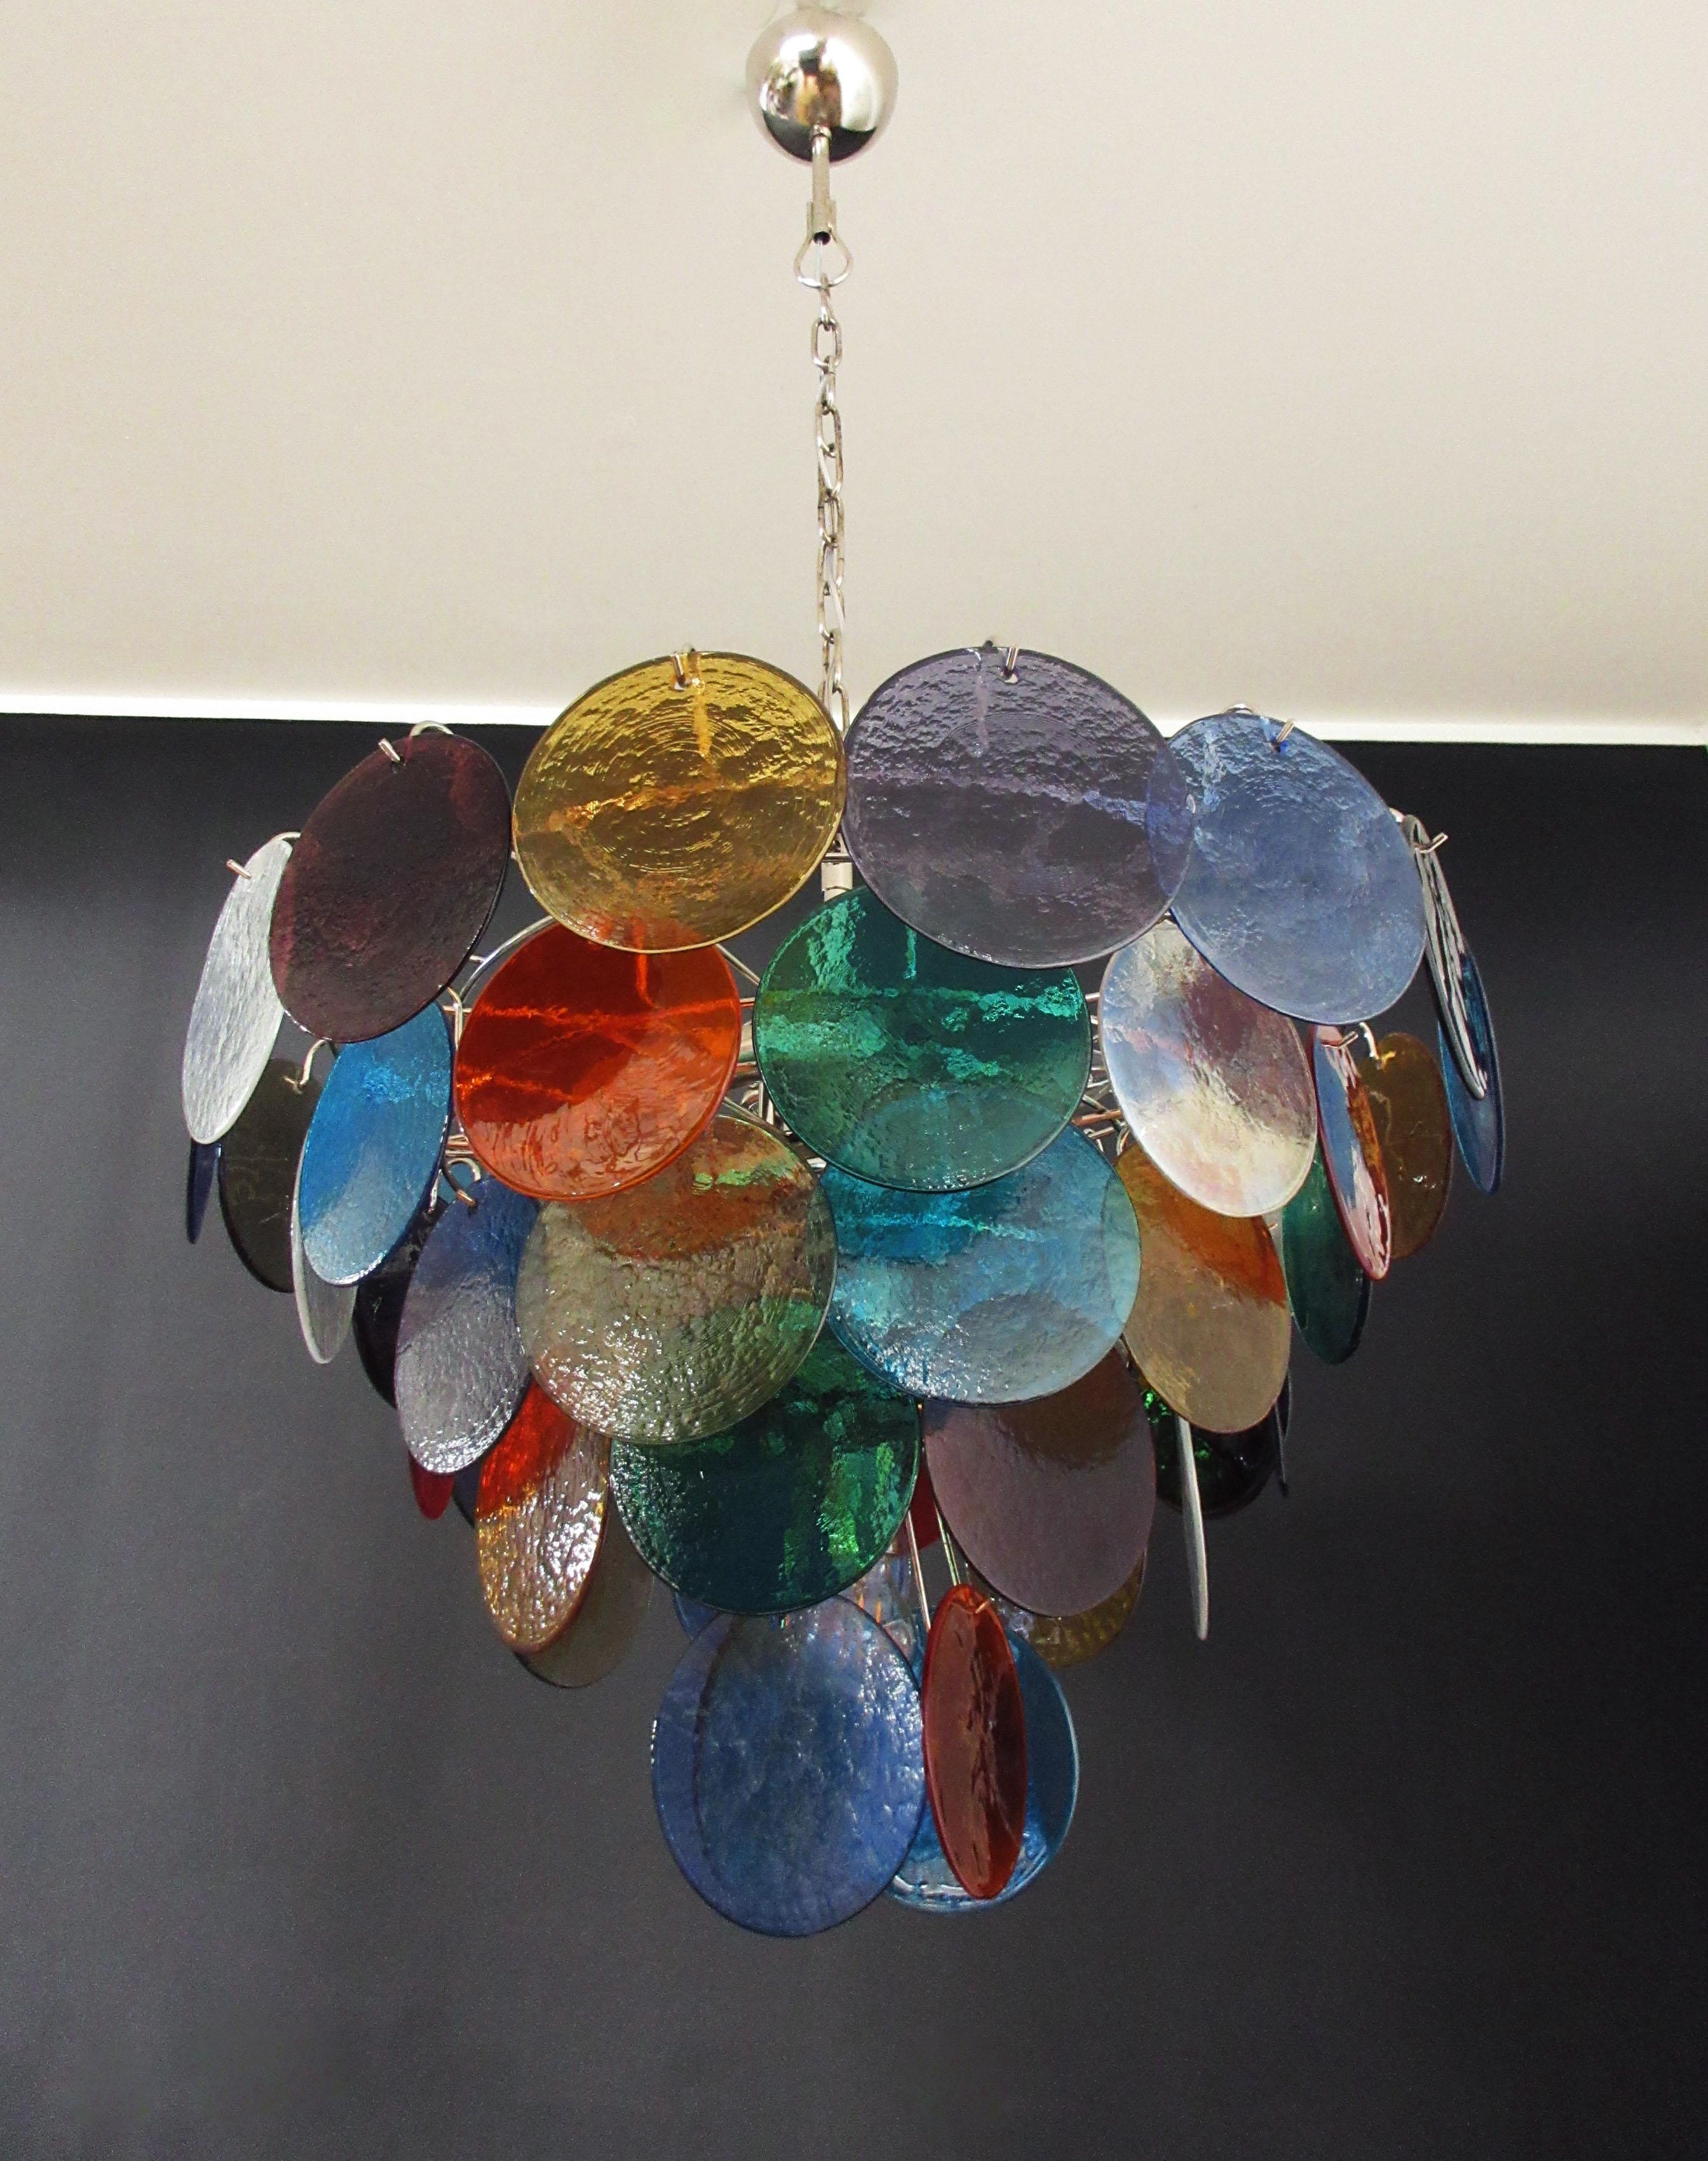 Italian Murano chandelier. The chandelier has 50 Murano multicolored glass disks. The glasses are now unavailable, they have the particularity of reflecting a multiplicity of colors, which makes the chandelier a true work of art. Nickel metal